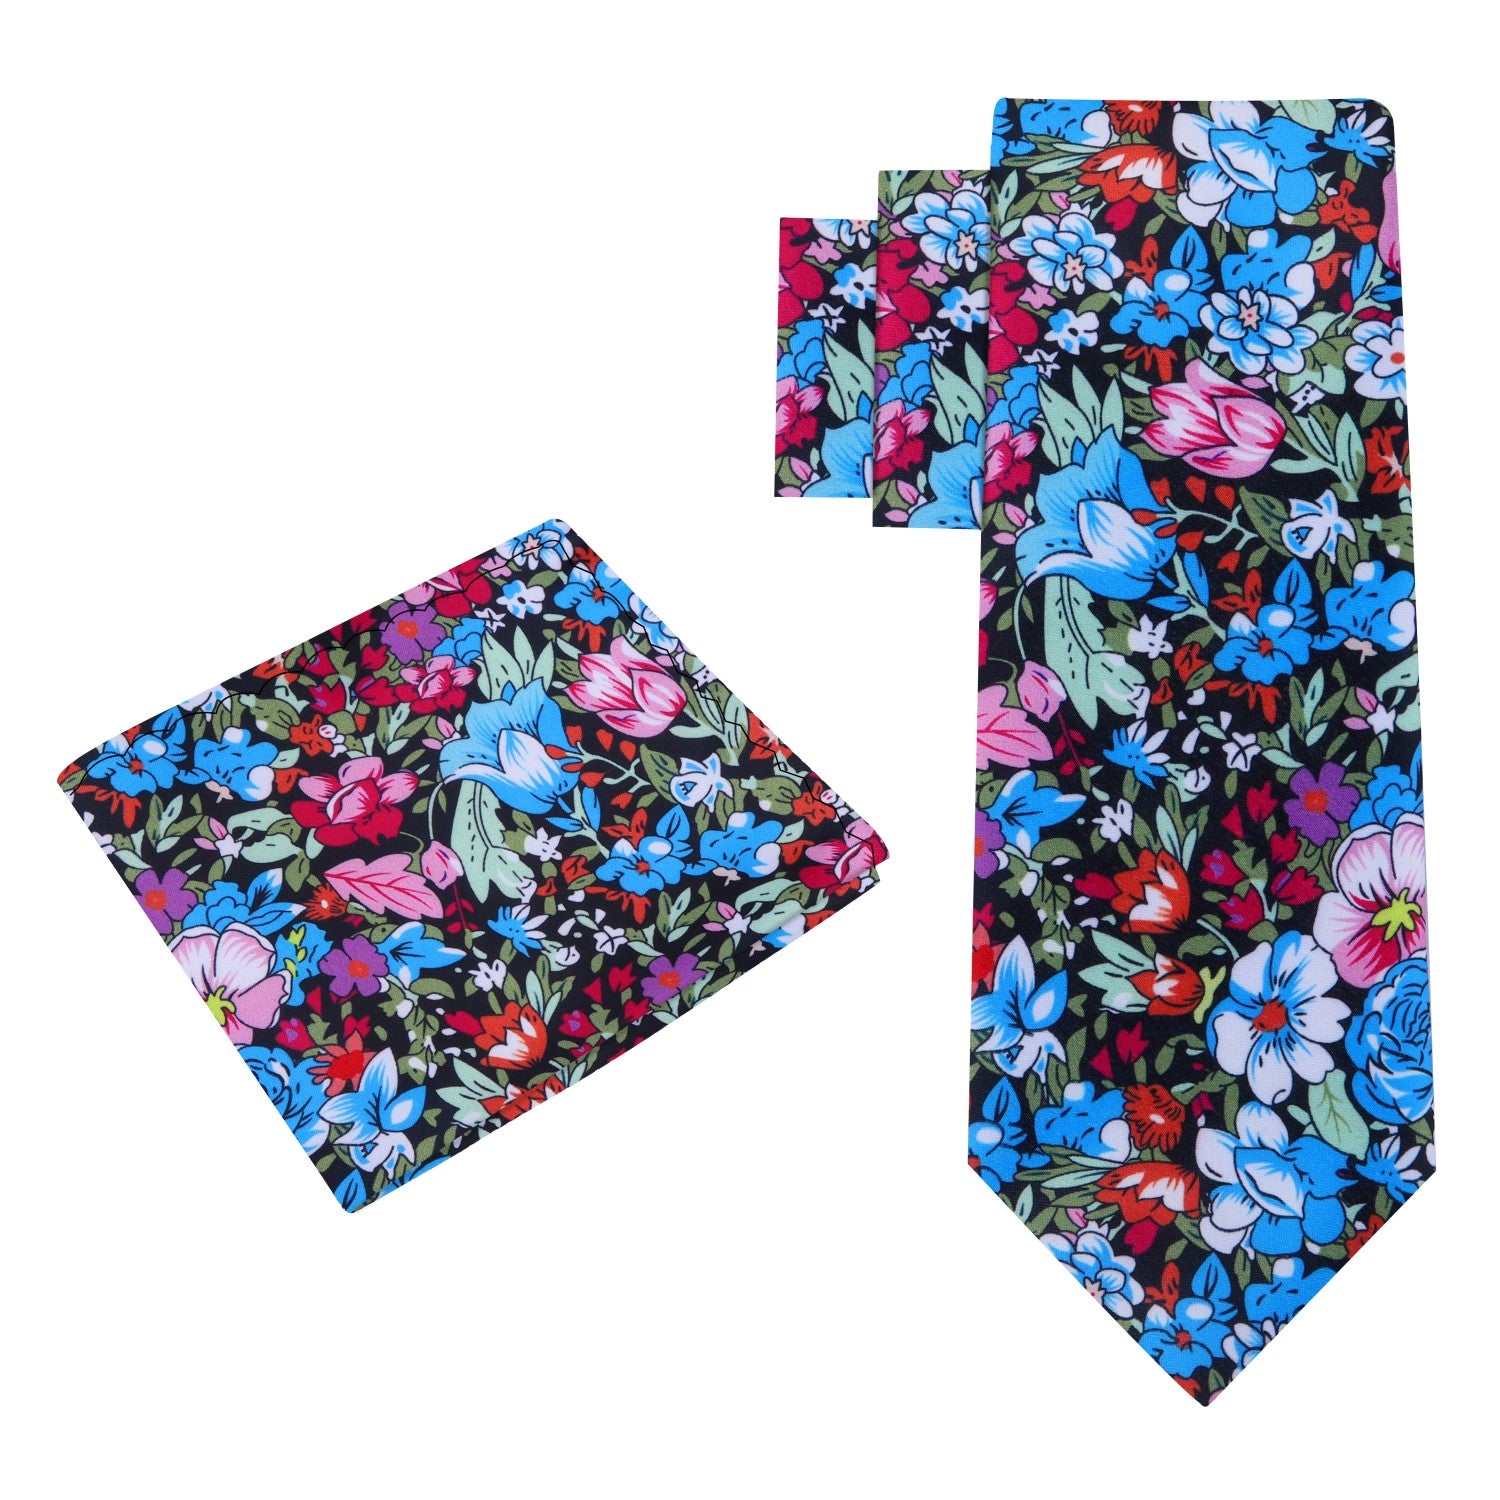 Alt View; Multi Colored Impressionist Flowers Tie and Square